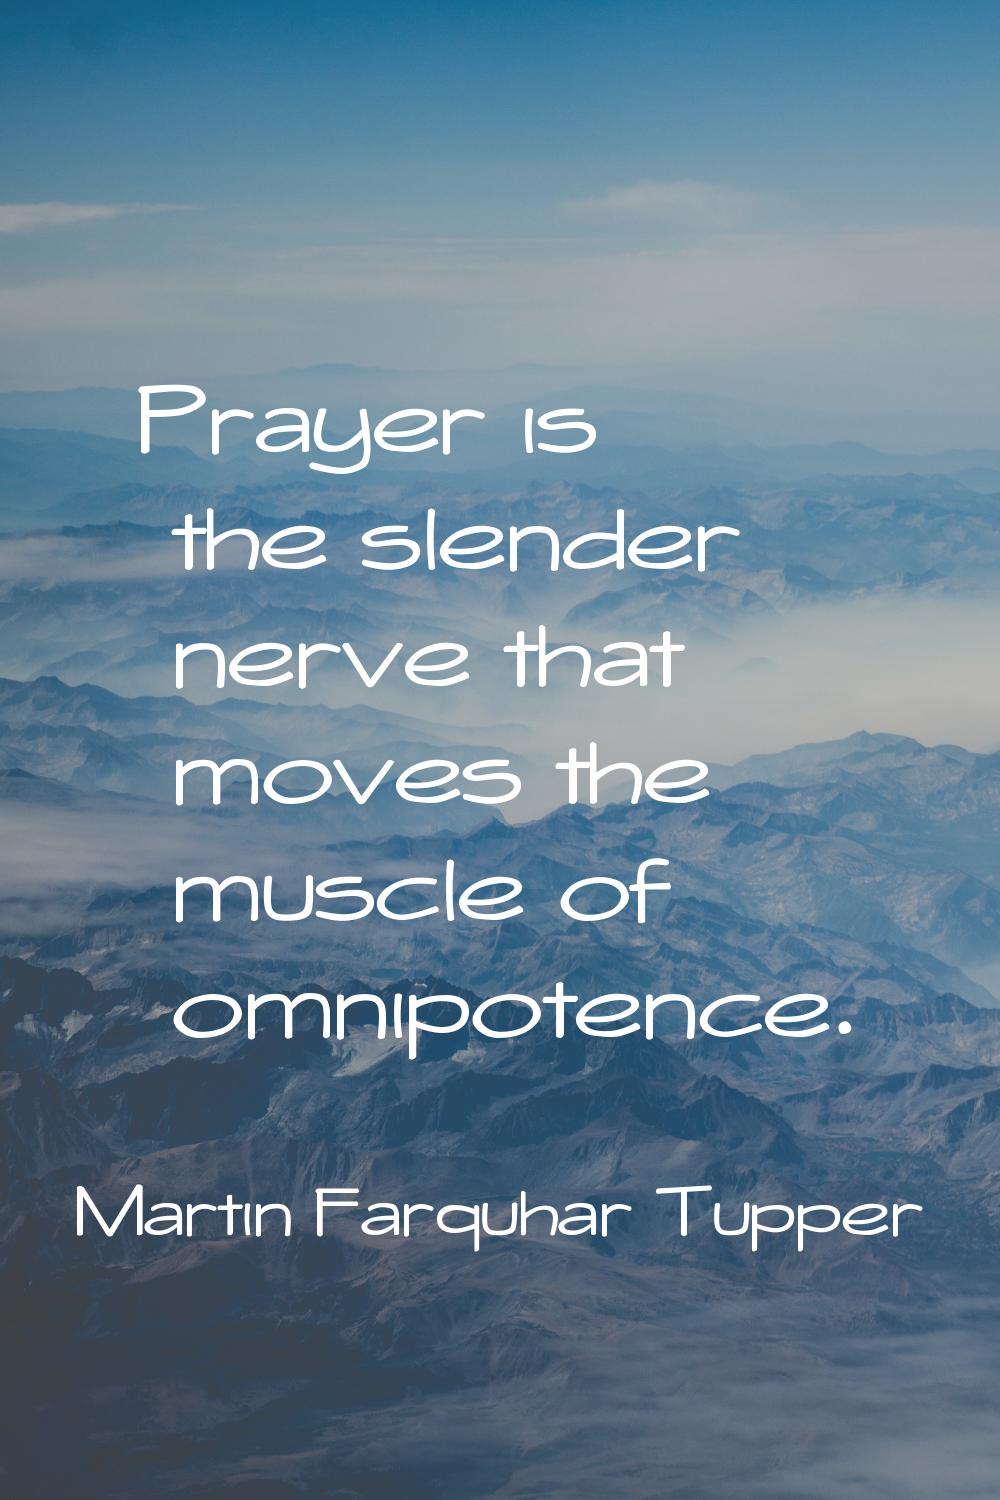 Prayer is the slender nerve that moves the muscle of omnipotence.